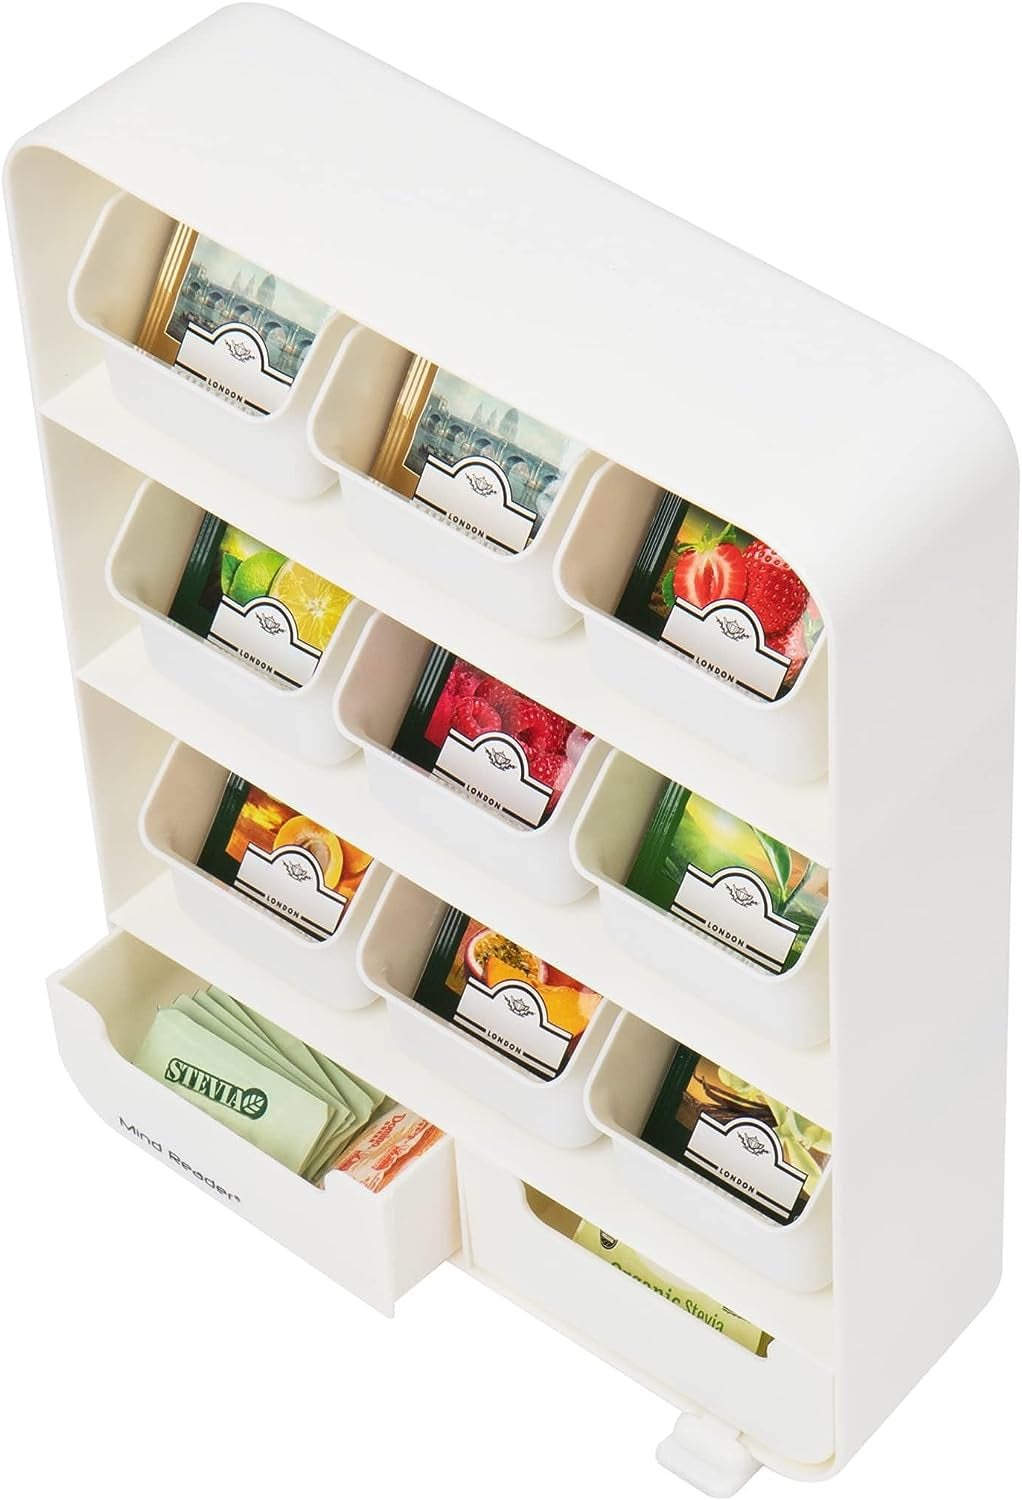 Mind Reader Tea Bag Organizer with Removable Drawers - White 11 Slots